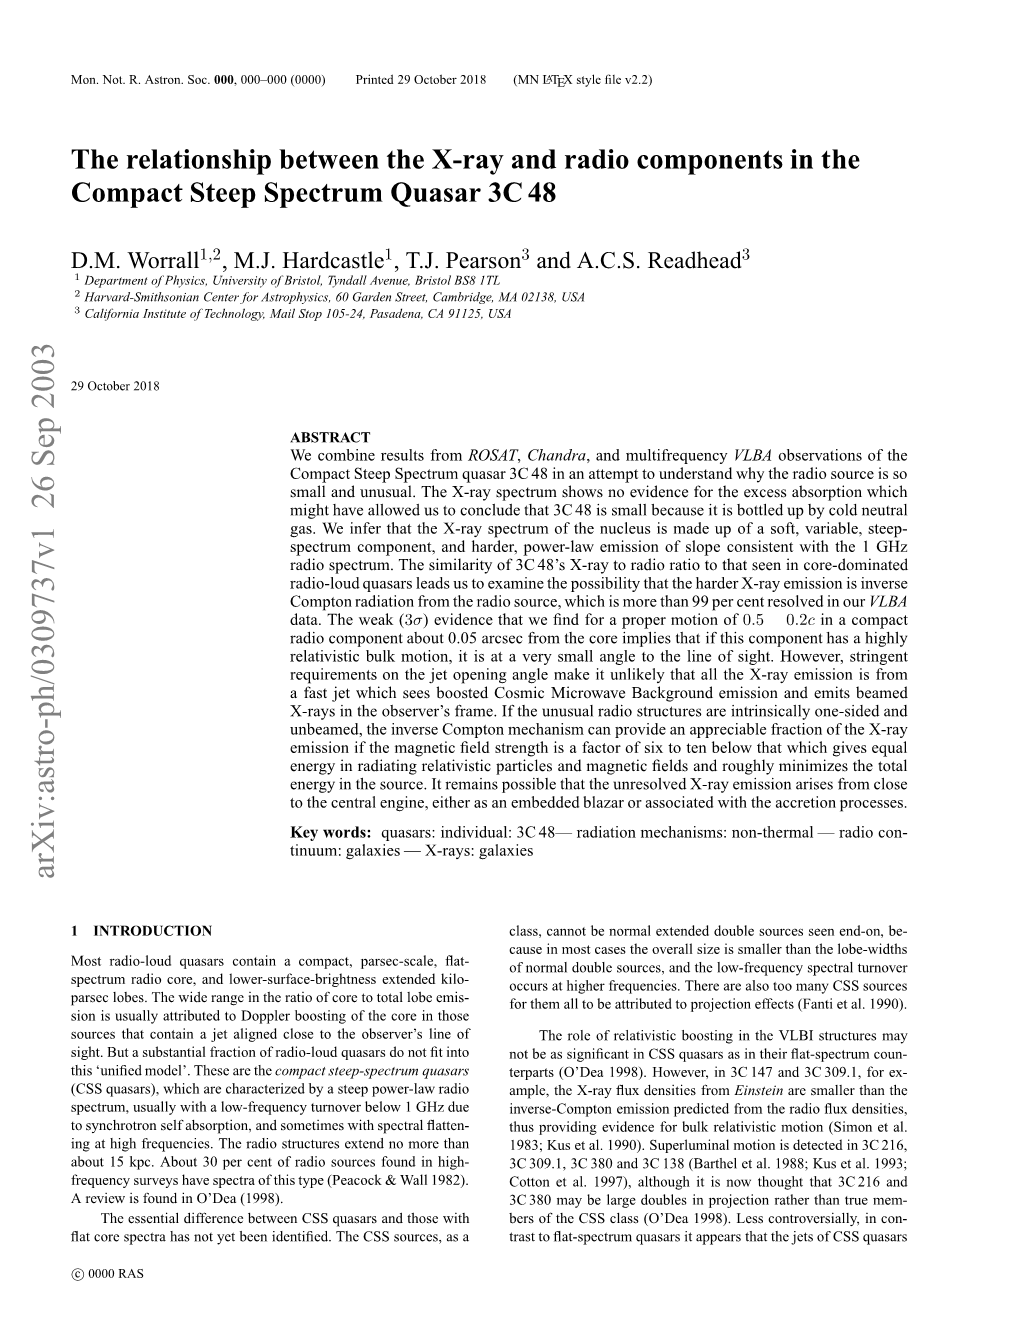 The Relationship Between the X-Ray and Radio Components in The